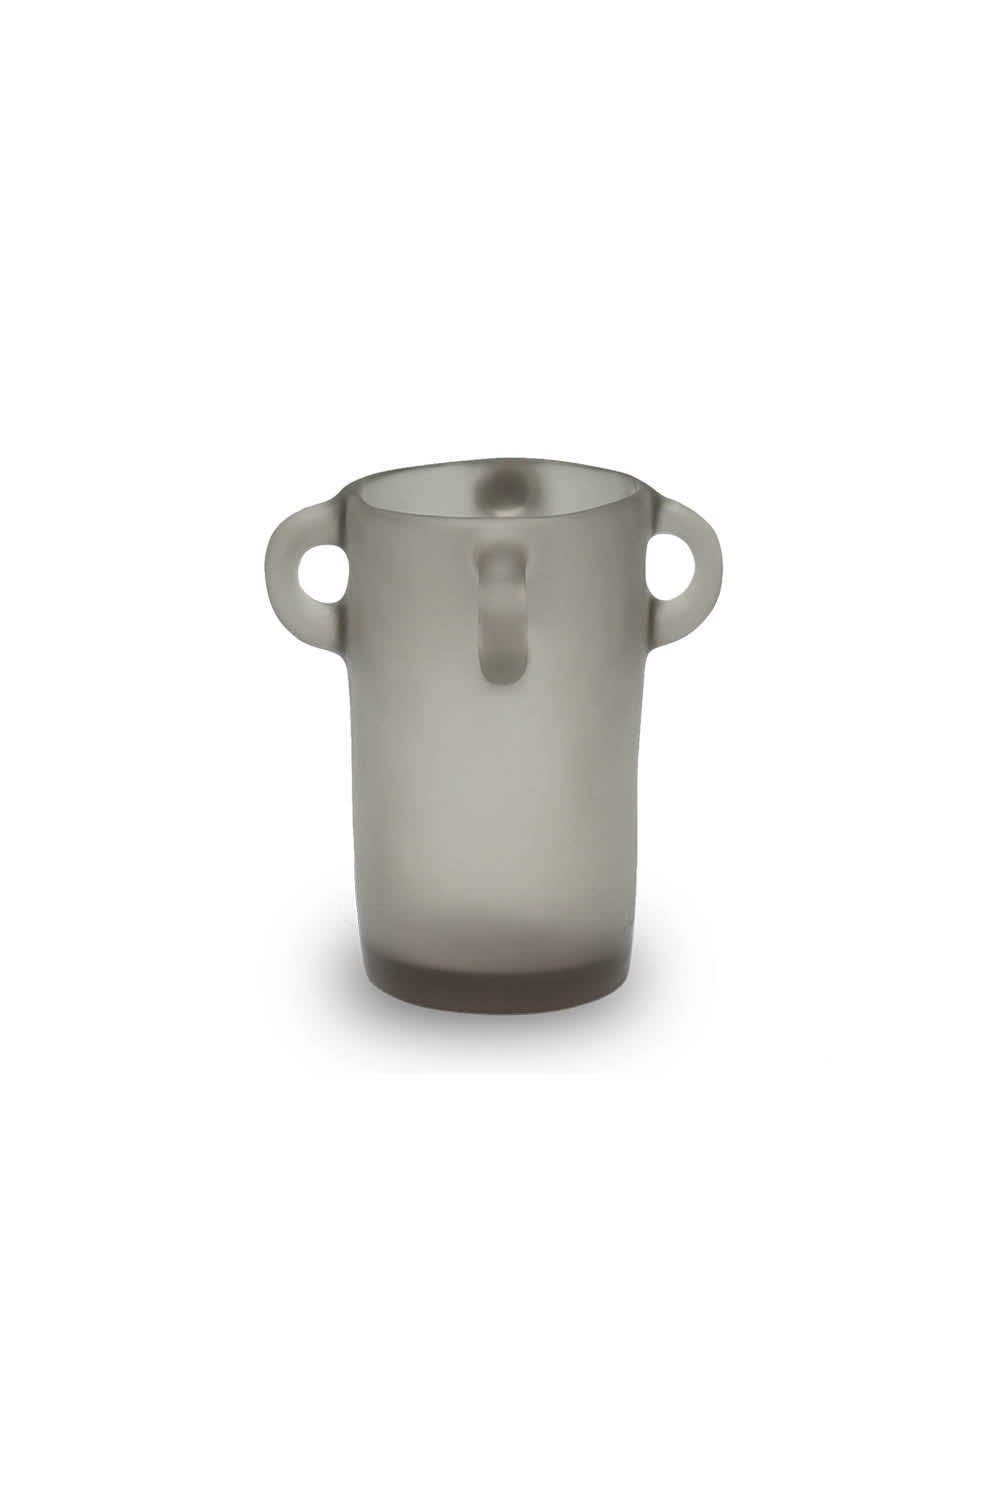 LOOPY Small Vase in Fog